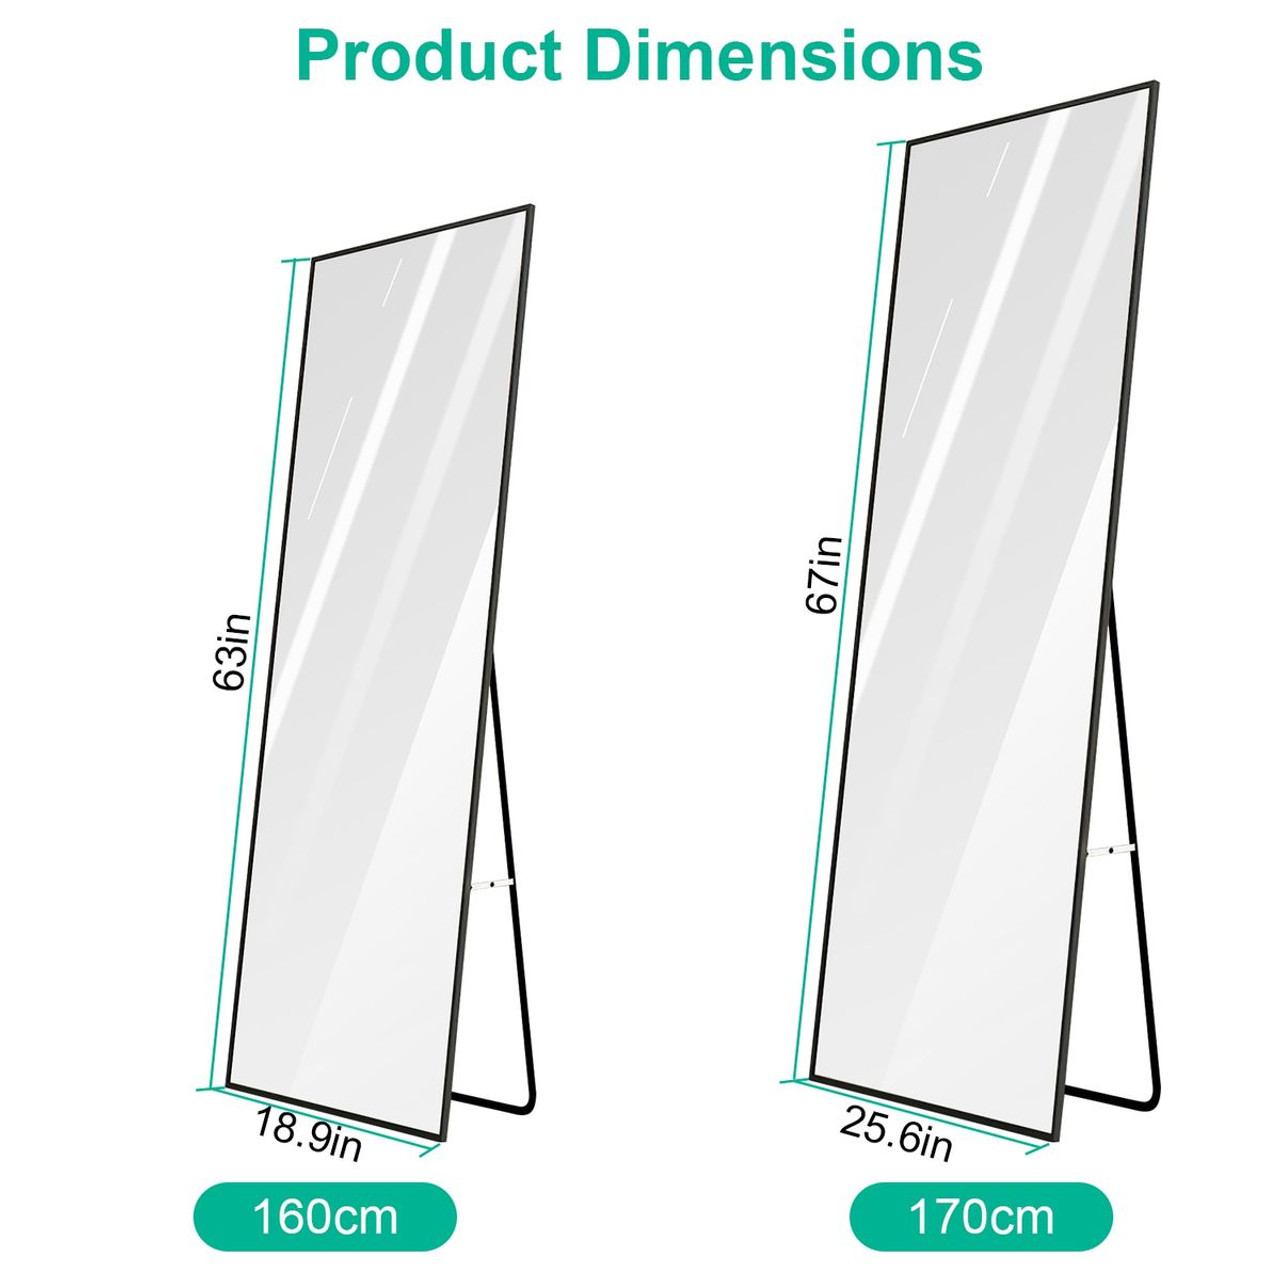  NewHome™ Full Body Mirror product image